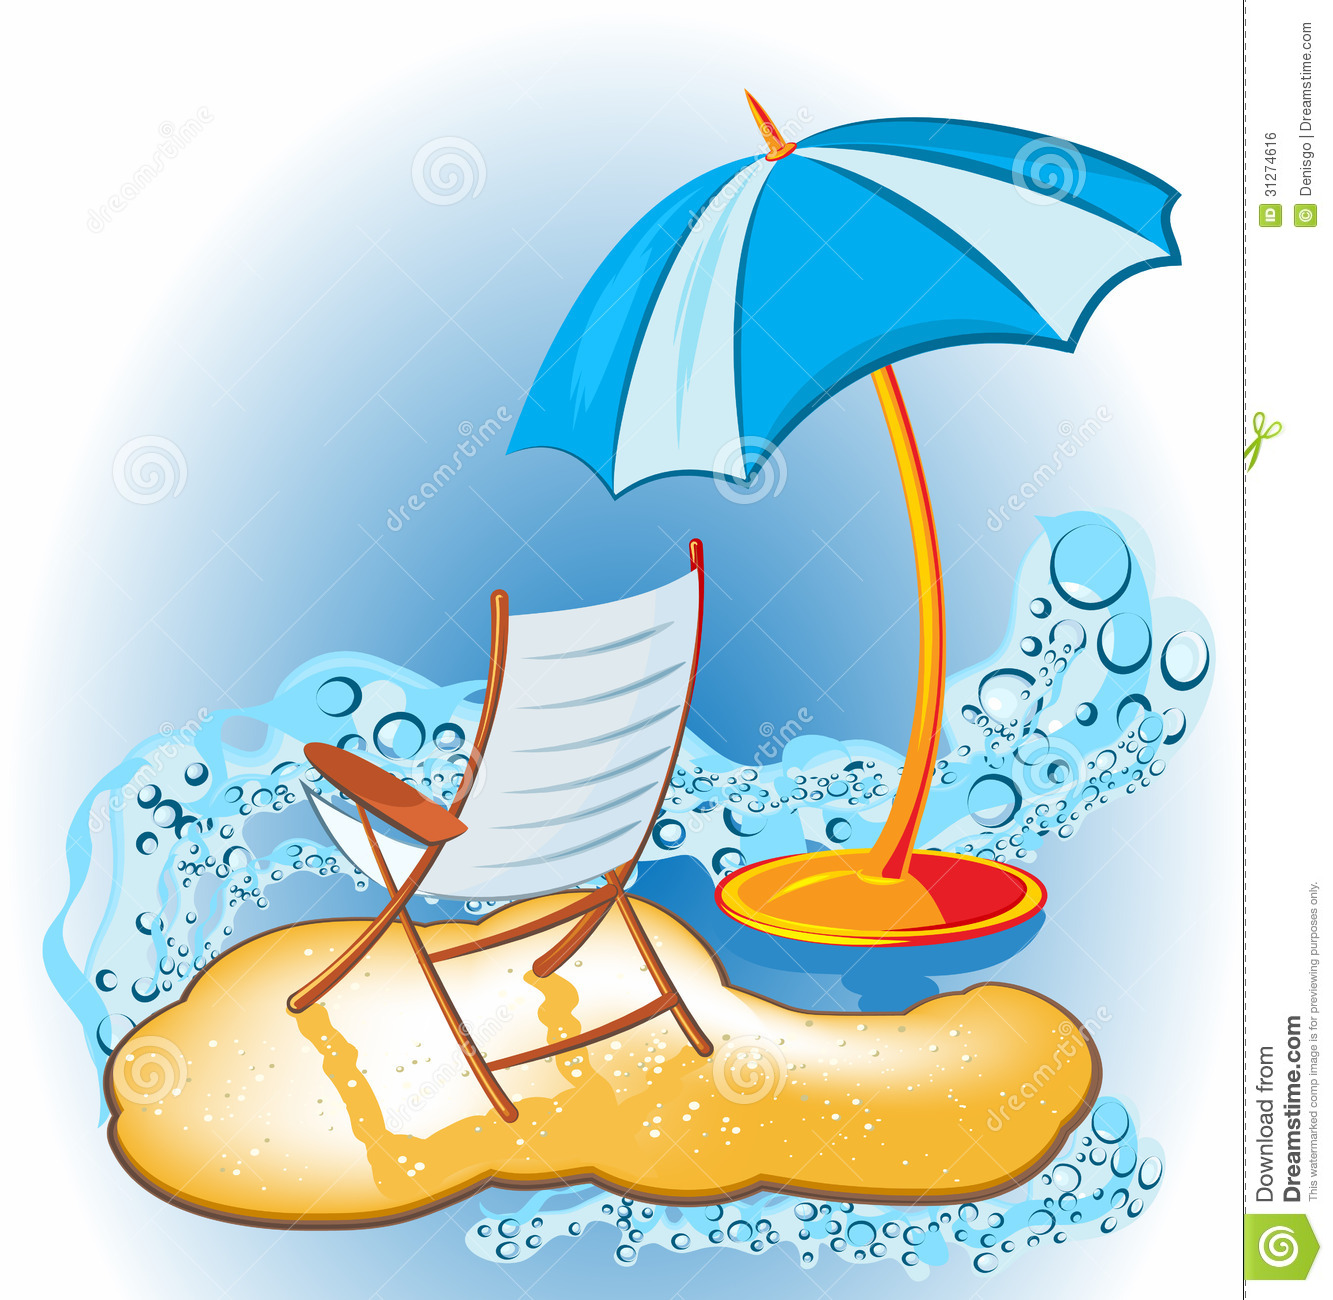 summer holiday clipart - photo #22